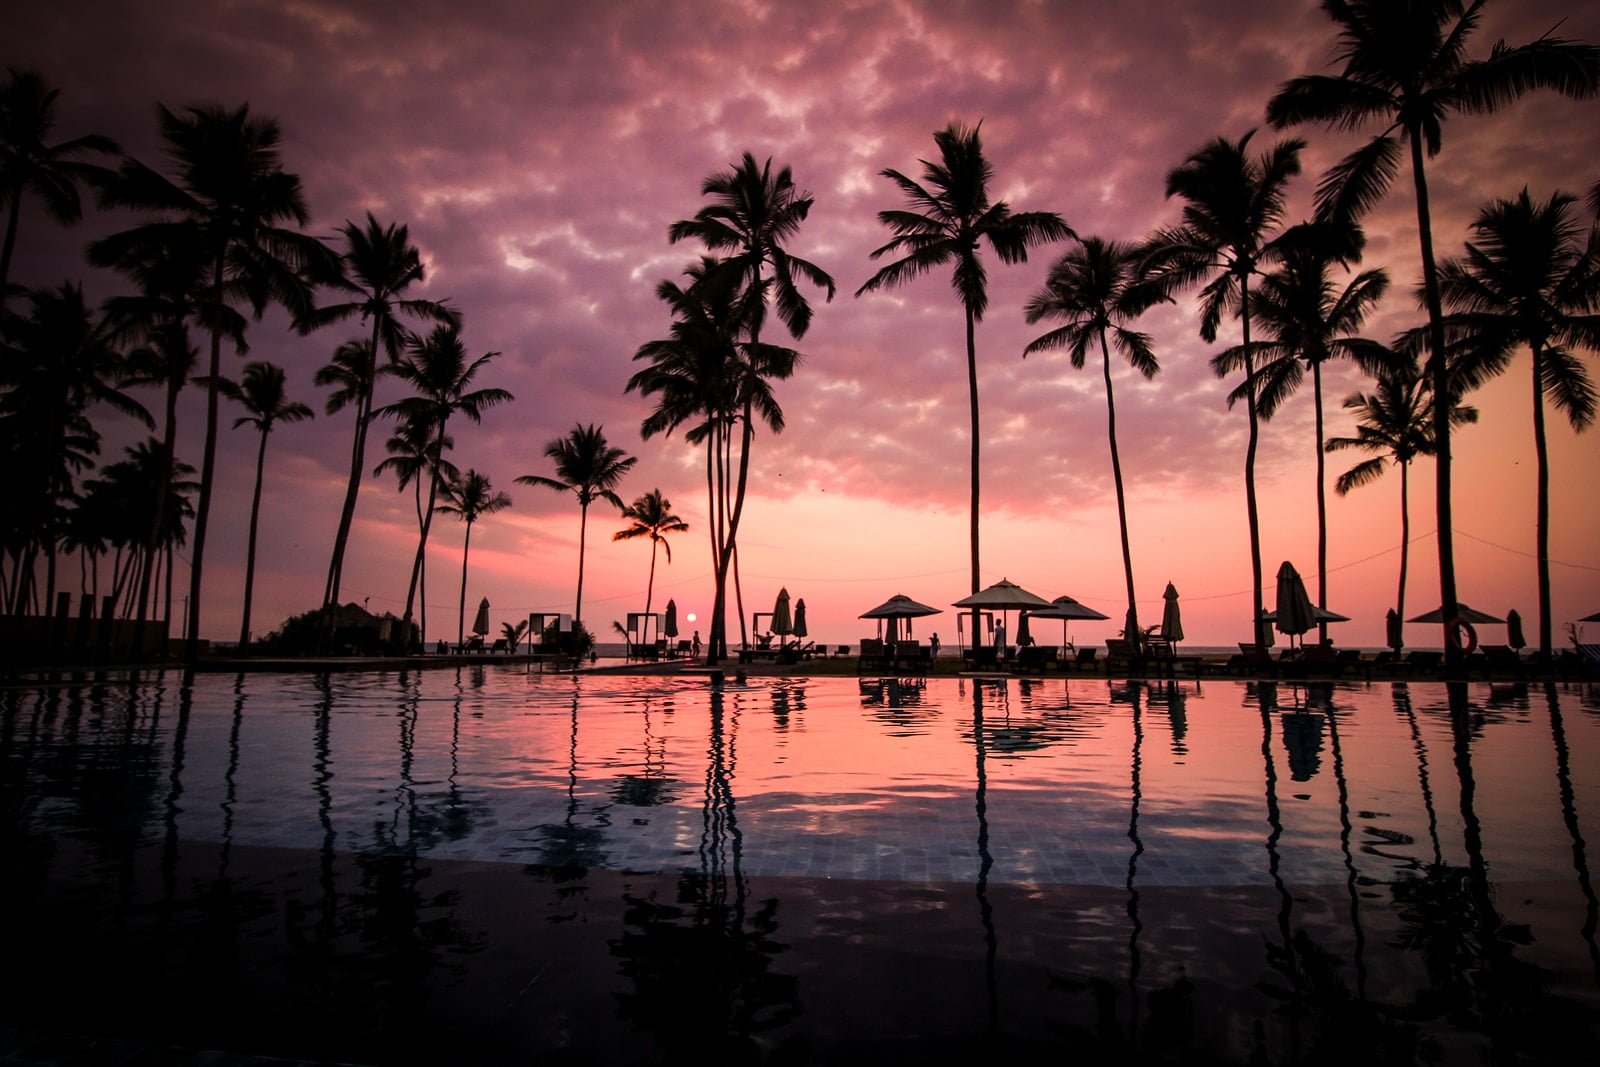 low angle photo of coconut trees beside body of water